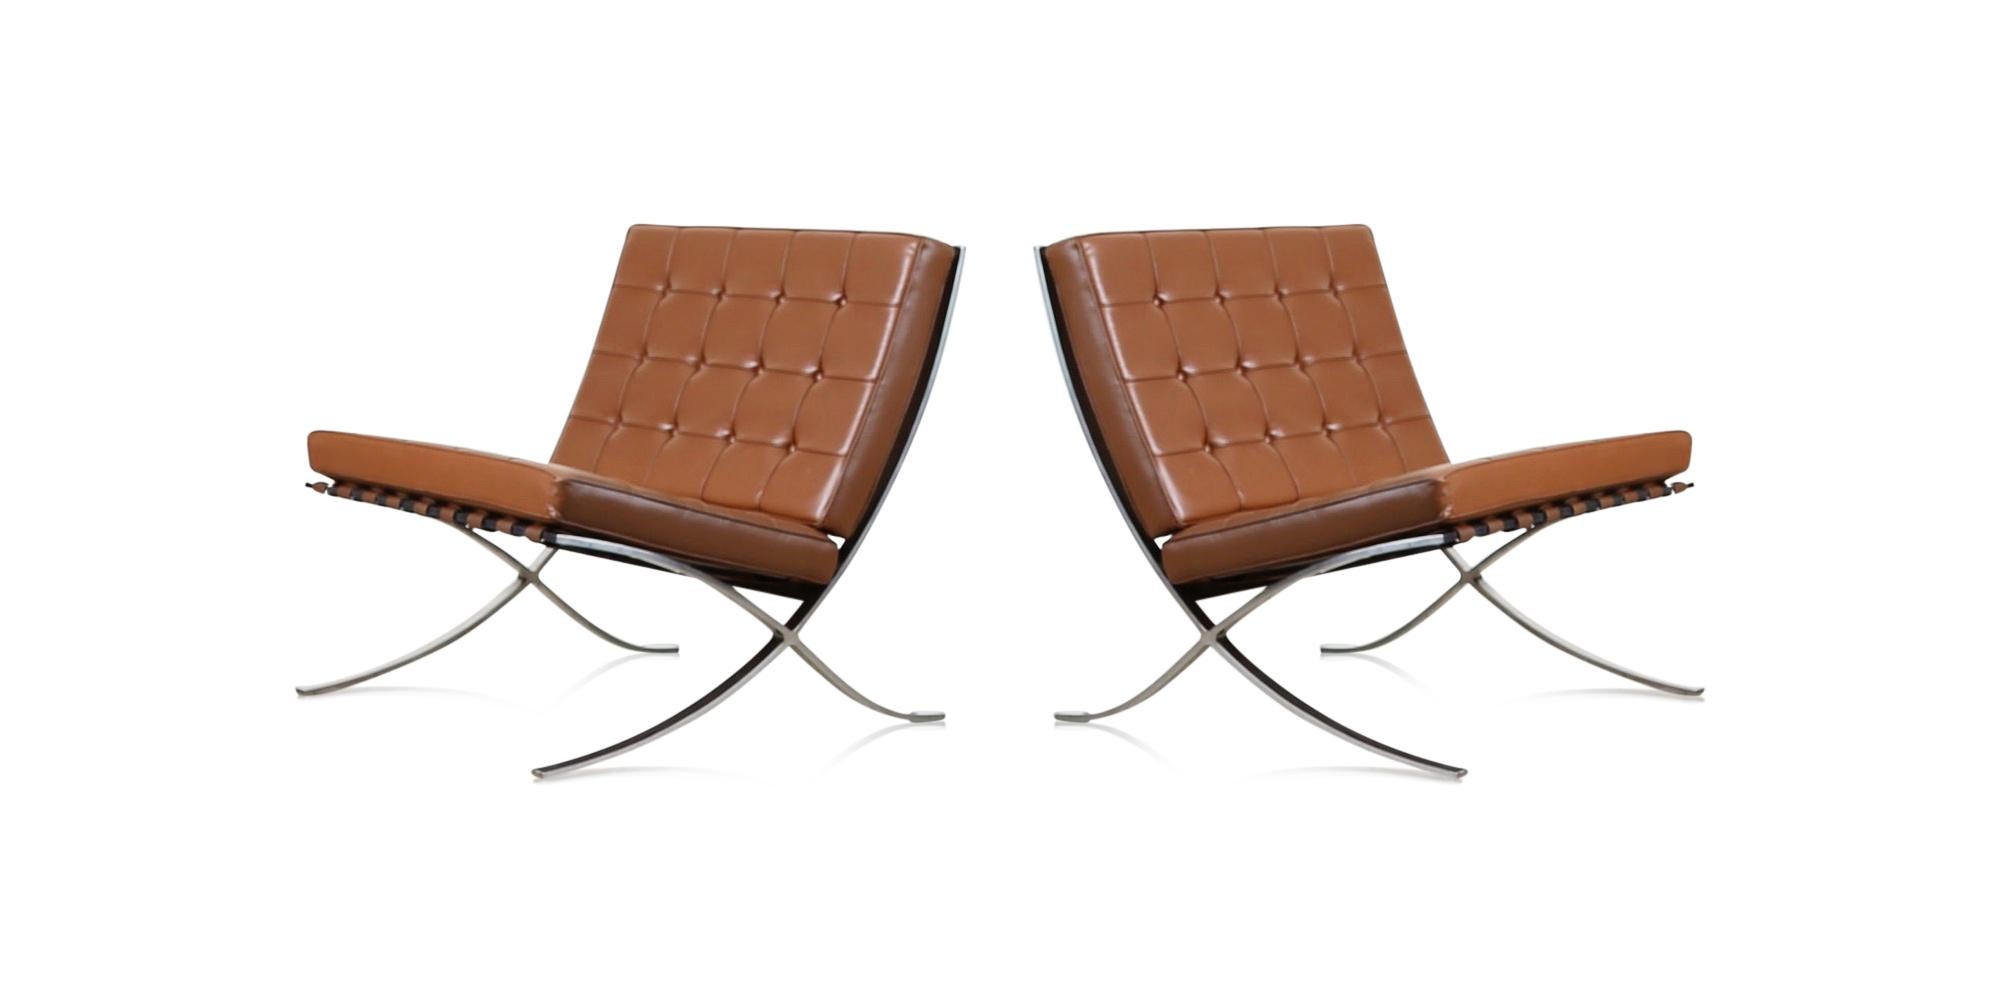 Being one of the most copied designs (and a timeless classic), we are always hesitant to purchase an unsigned Barcelona lounge chair and we suggest you be hesitant as well, so of course we were delighted to find this fantastic pair which are both